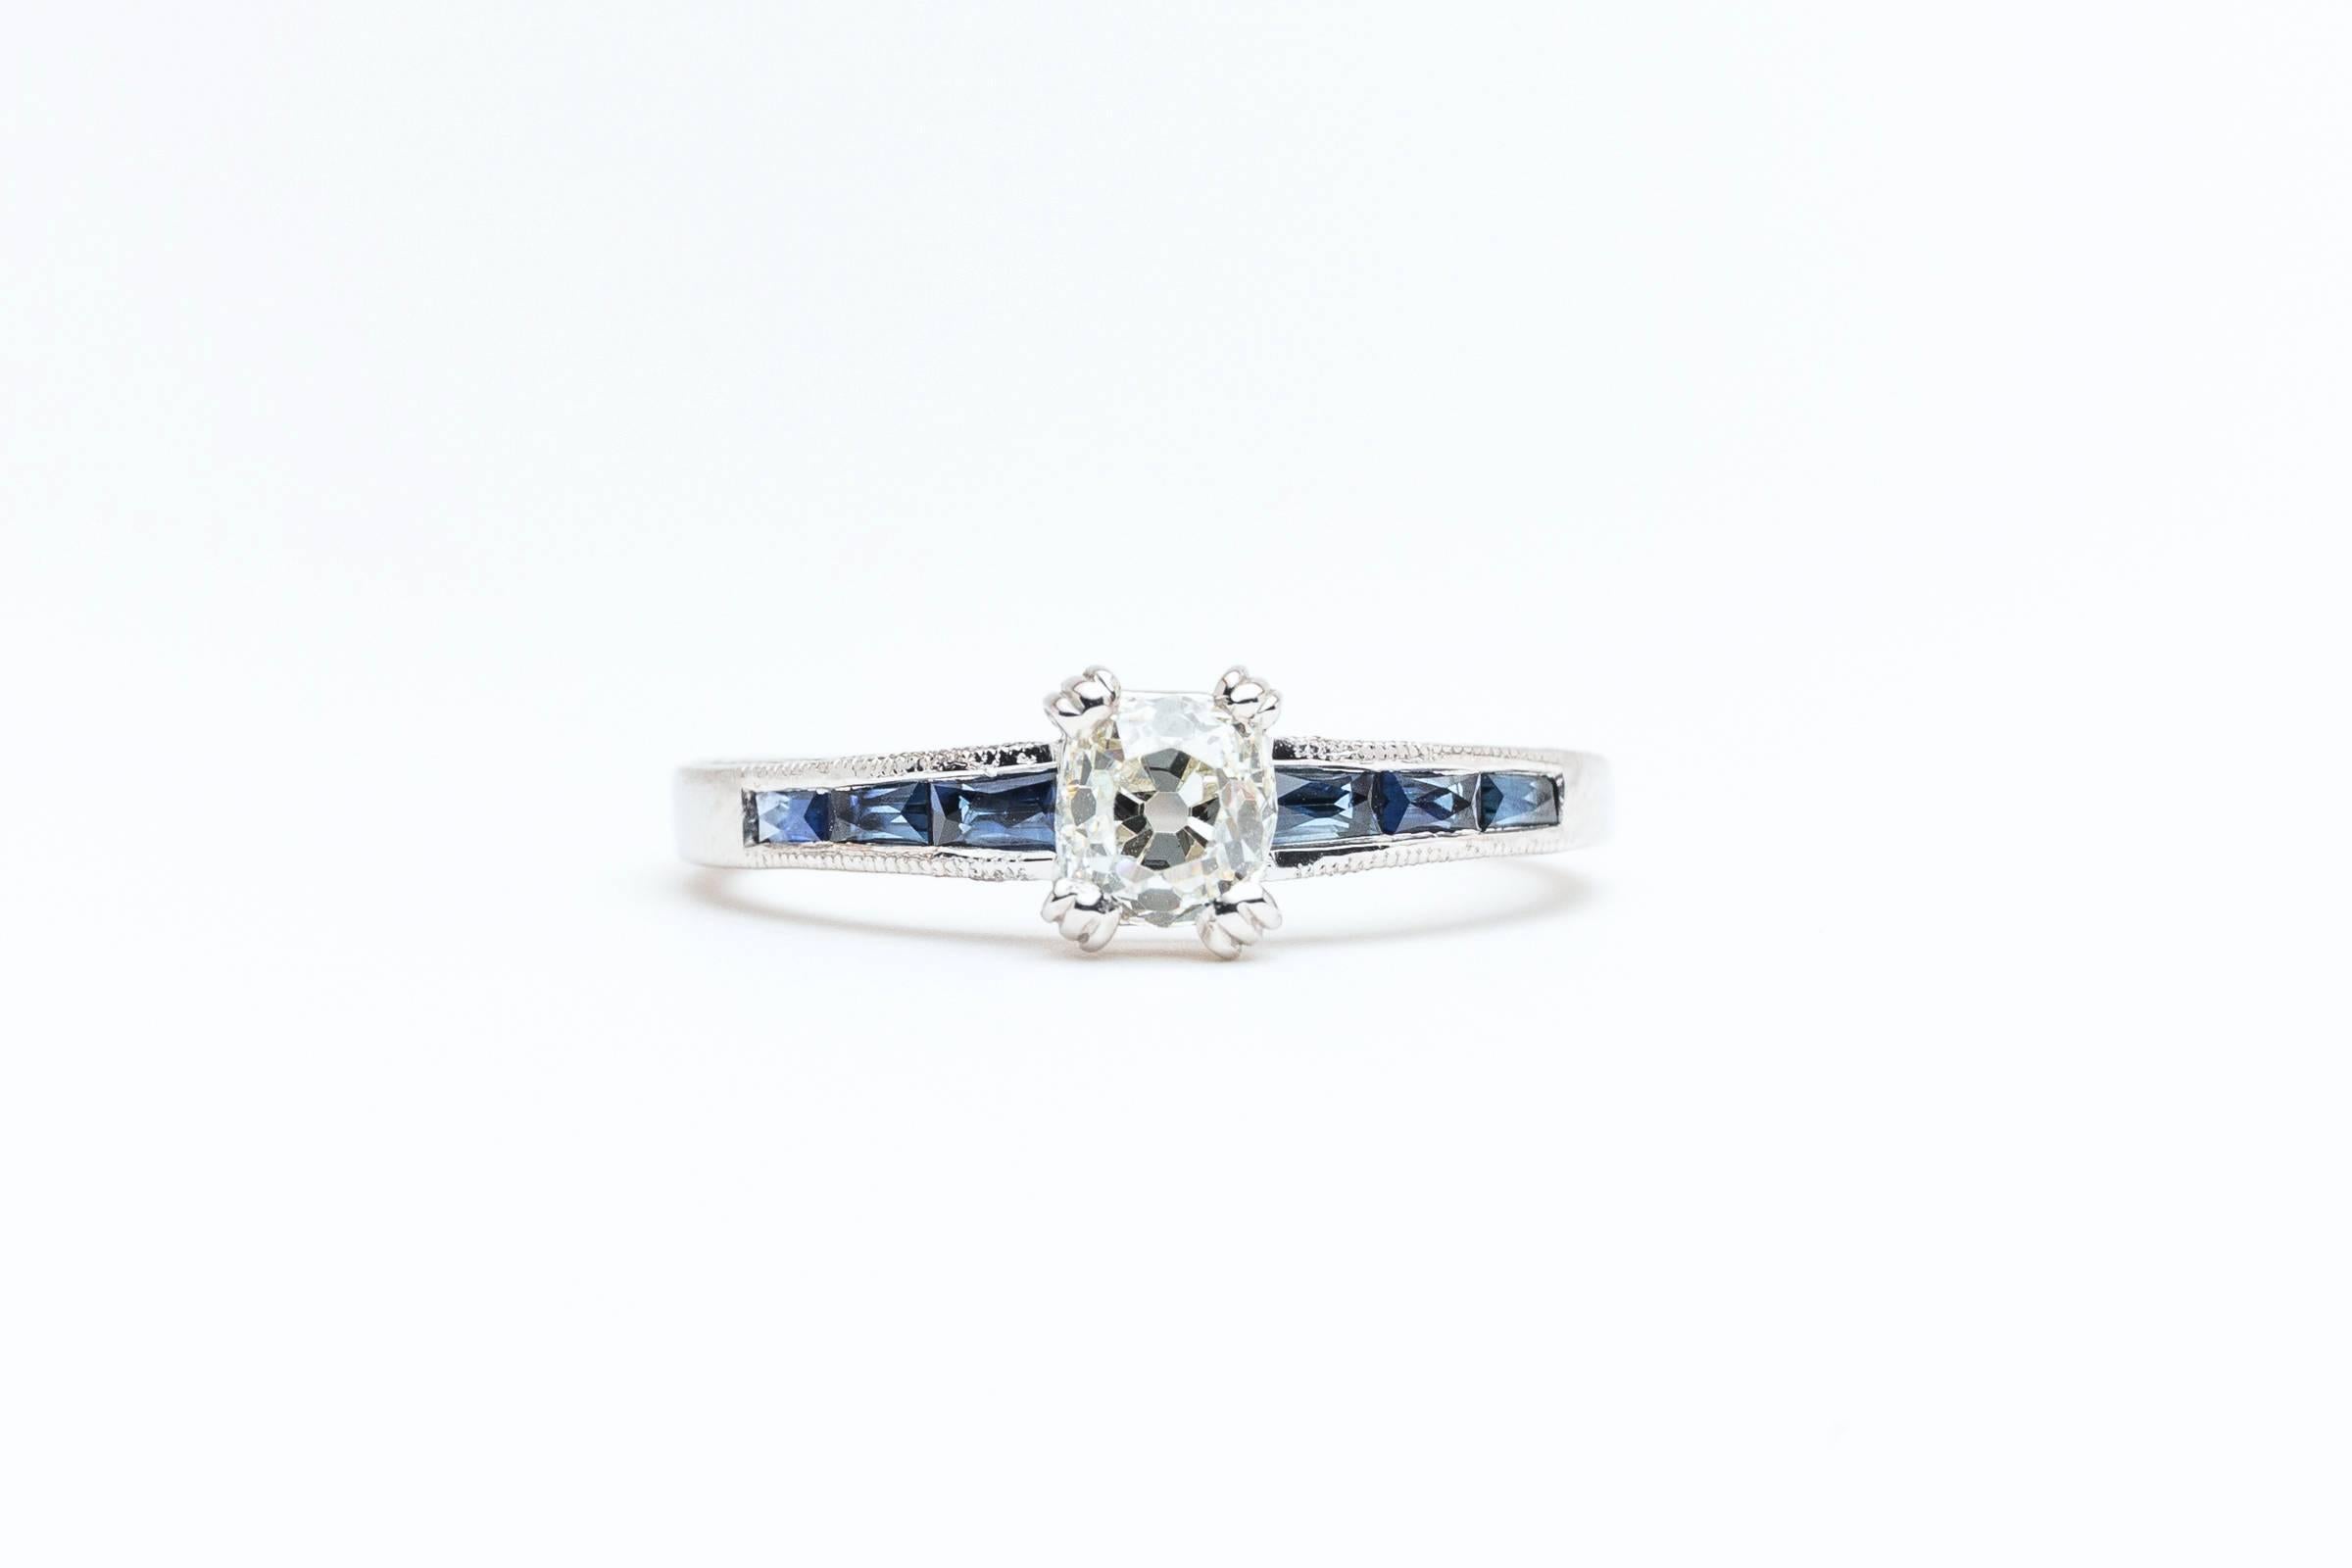 Beacon Hill Jewelers Presents:

A beautiful handmade diamond and sapphire engagement ring in luxurious platinum. Centered by a sparkling antique old mine cut cushion shaped diamond, this ring features channel set French cut sapphires accented by